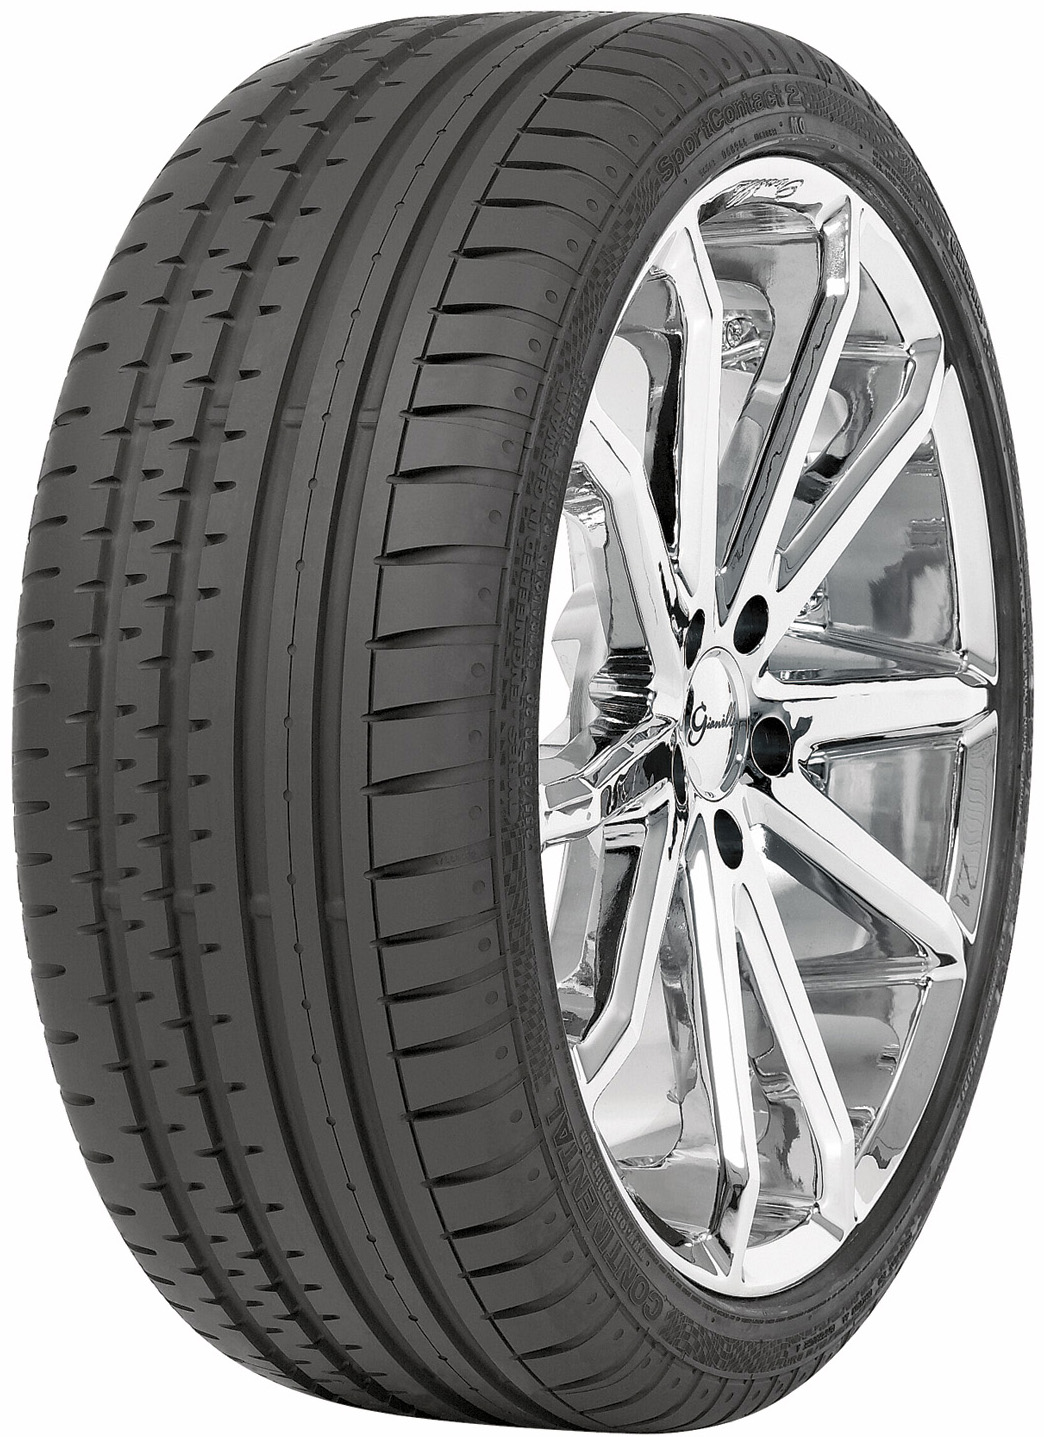 Anvelope auto CONTINENTAL SC-2 MO MERCEDES FP 255/45 R18 99Y